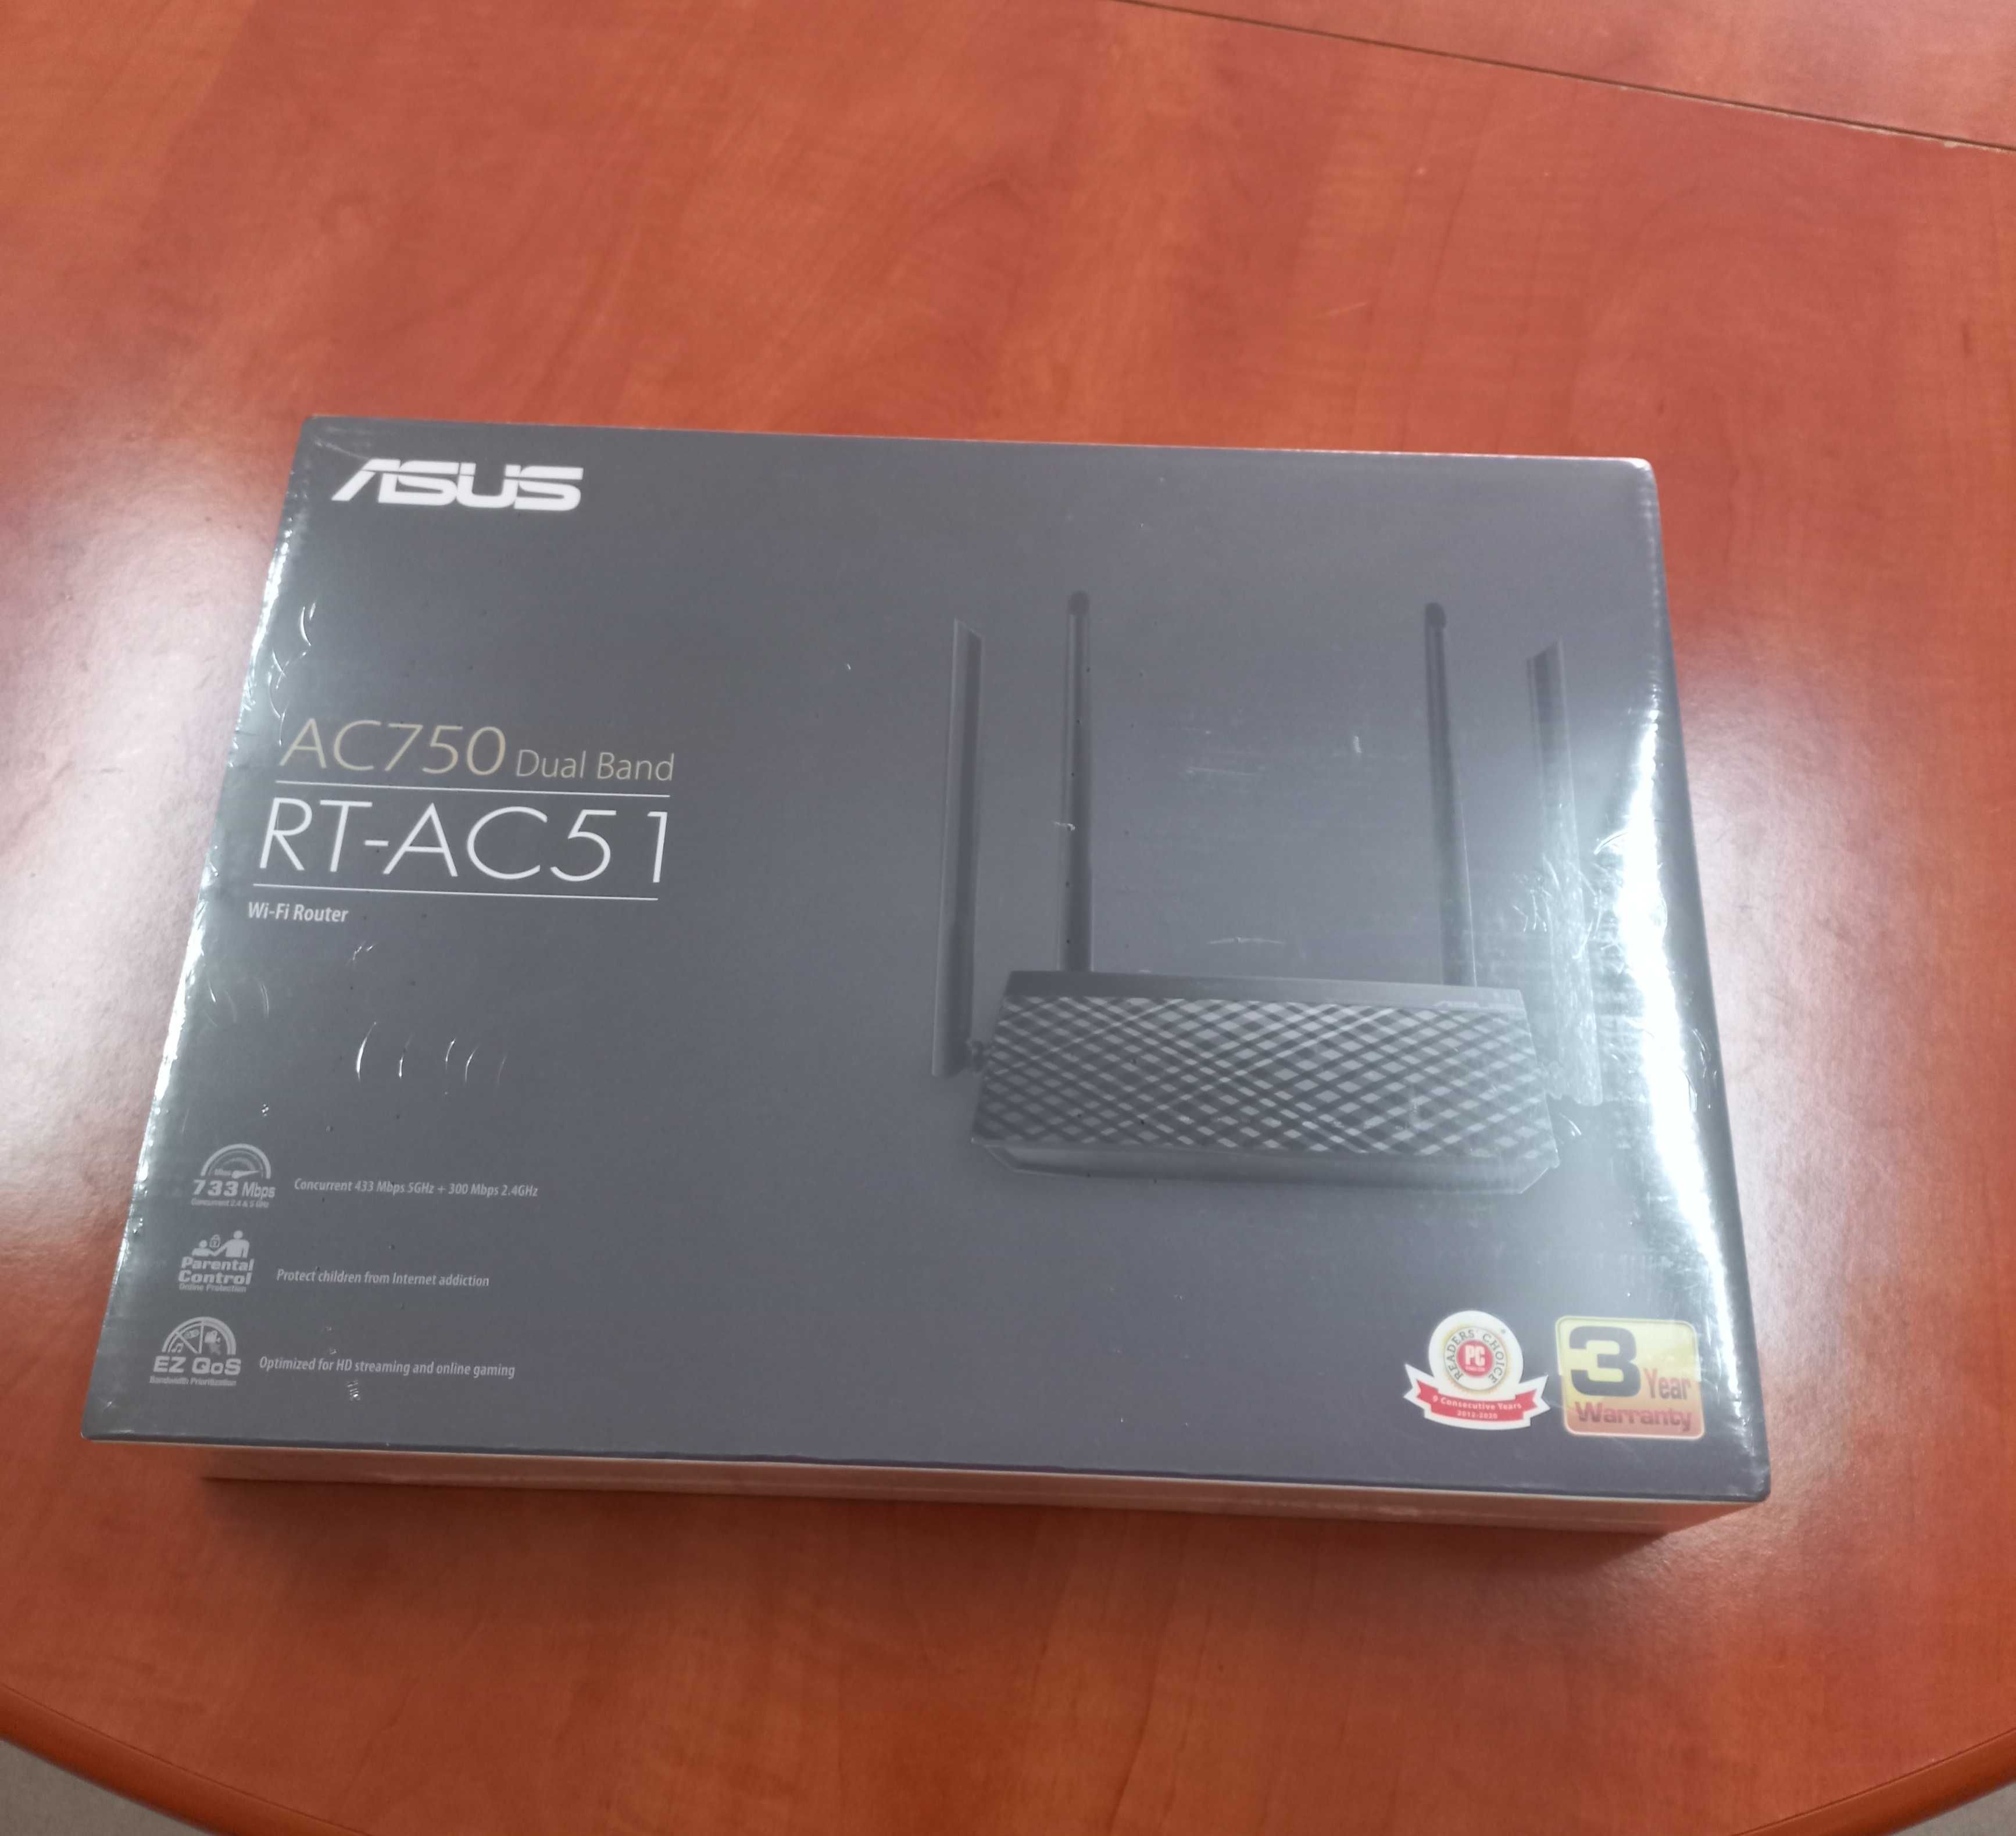 ASUS - RT-AC51 Wireless-AC750 Dual-Band Router